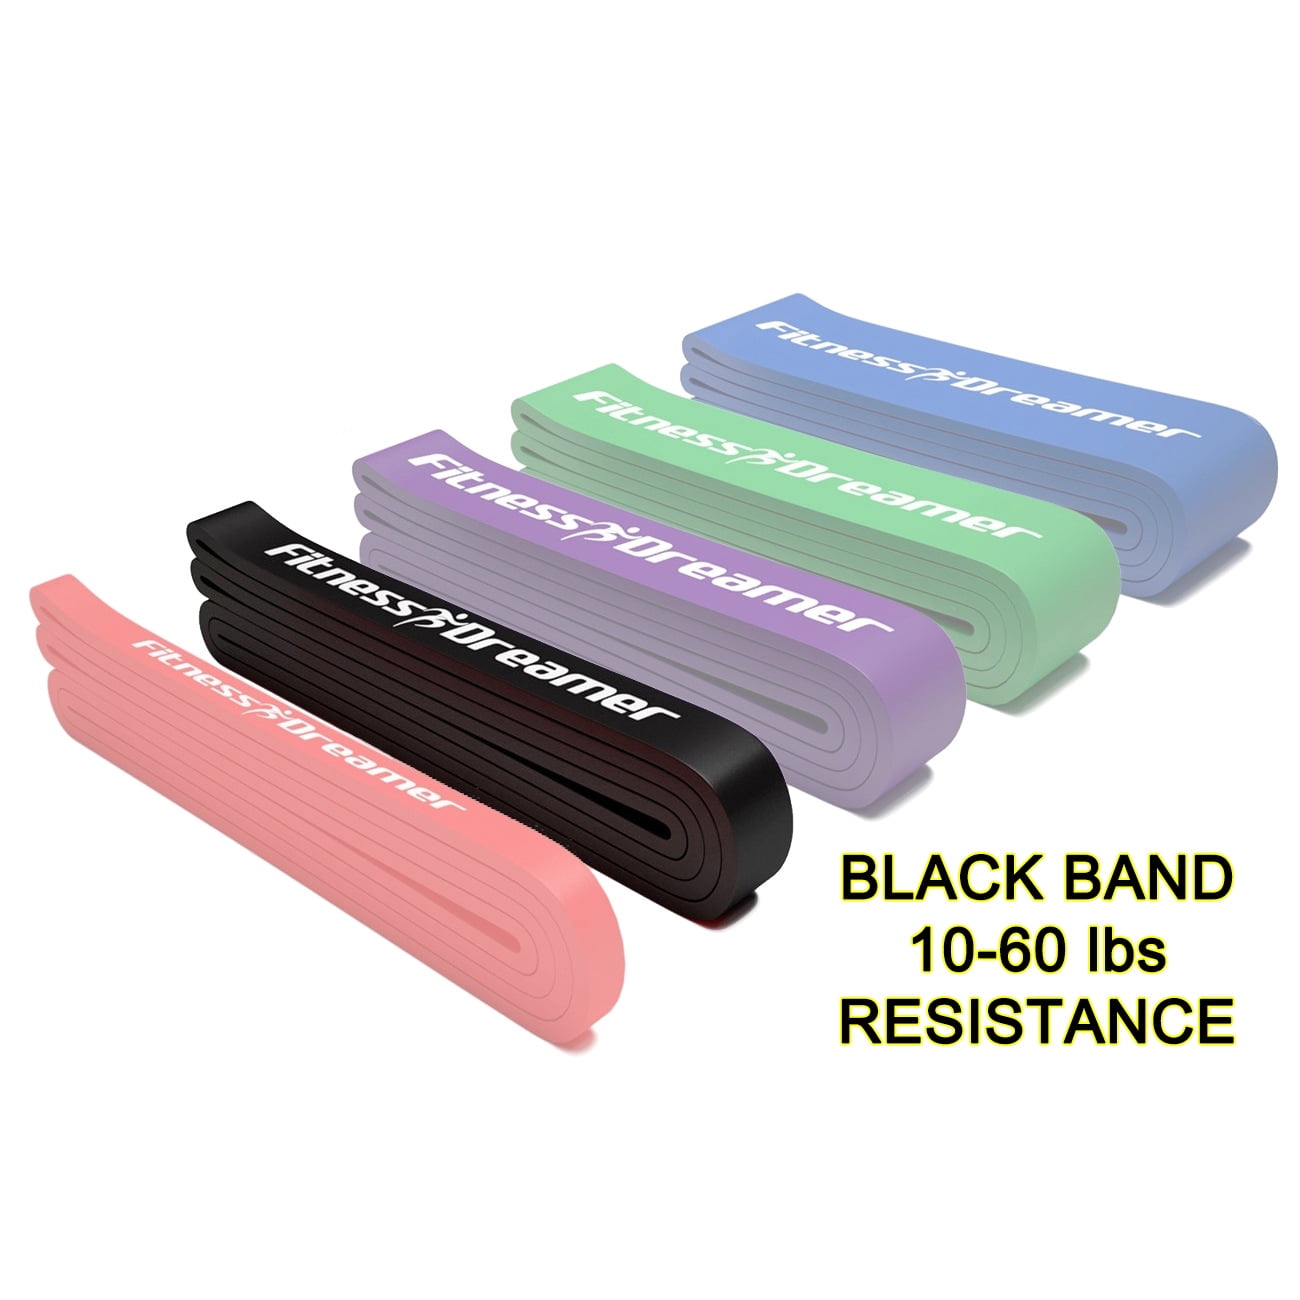 Details about   Slip-proof Pull Handles Resistance Bands Replacement Training Gym Yoga Equipment 